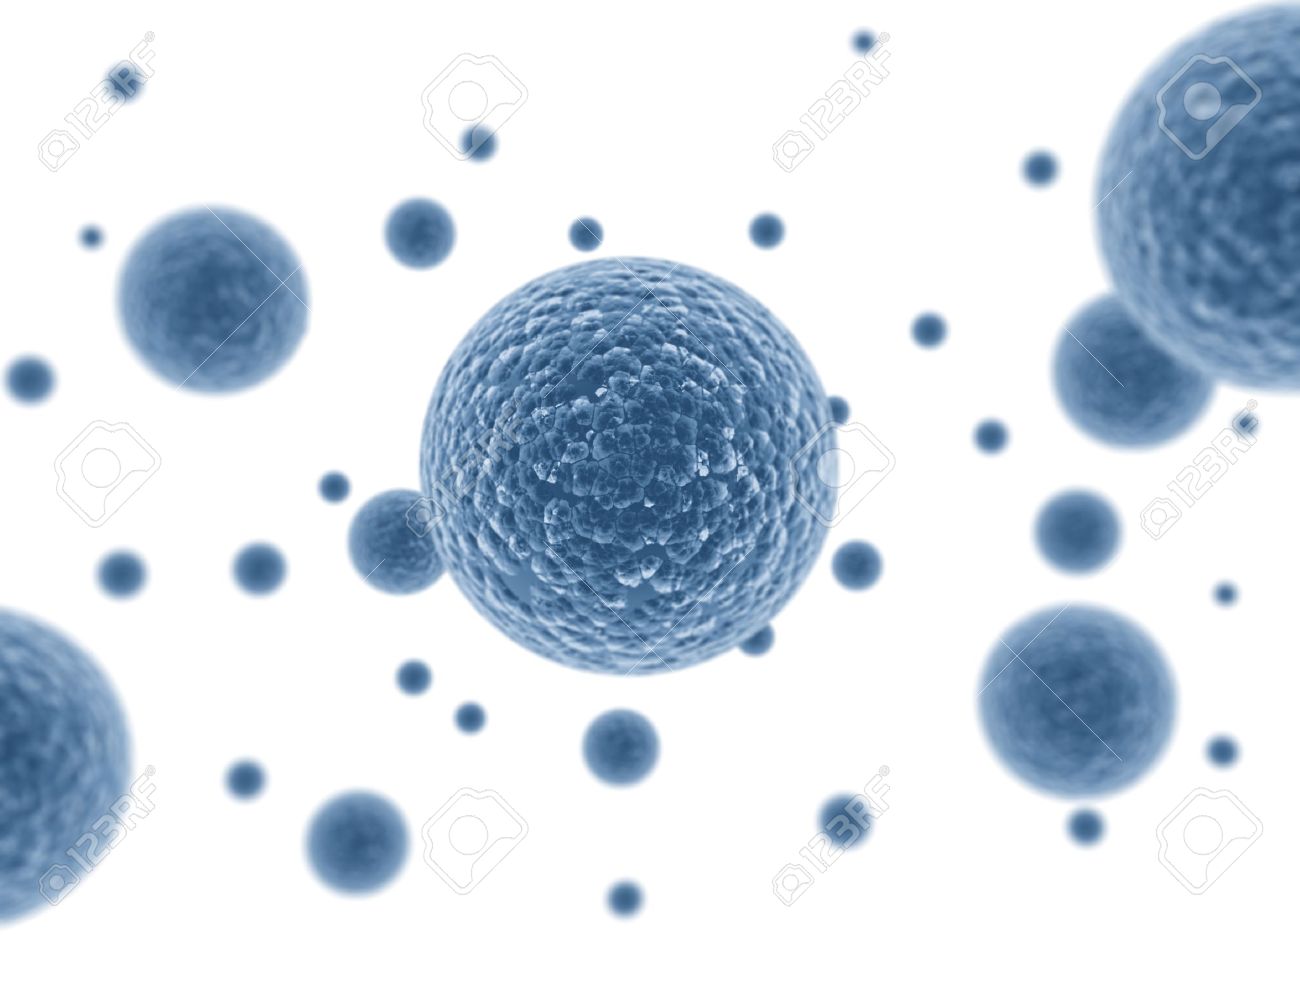 Bacteria Cells Isolated On White Background Stock Photo Picture